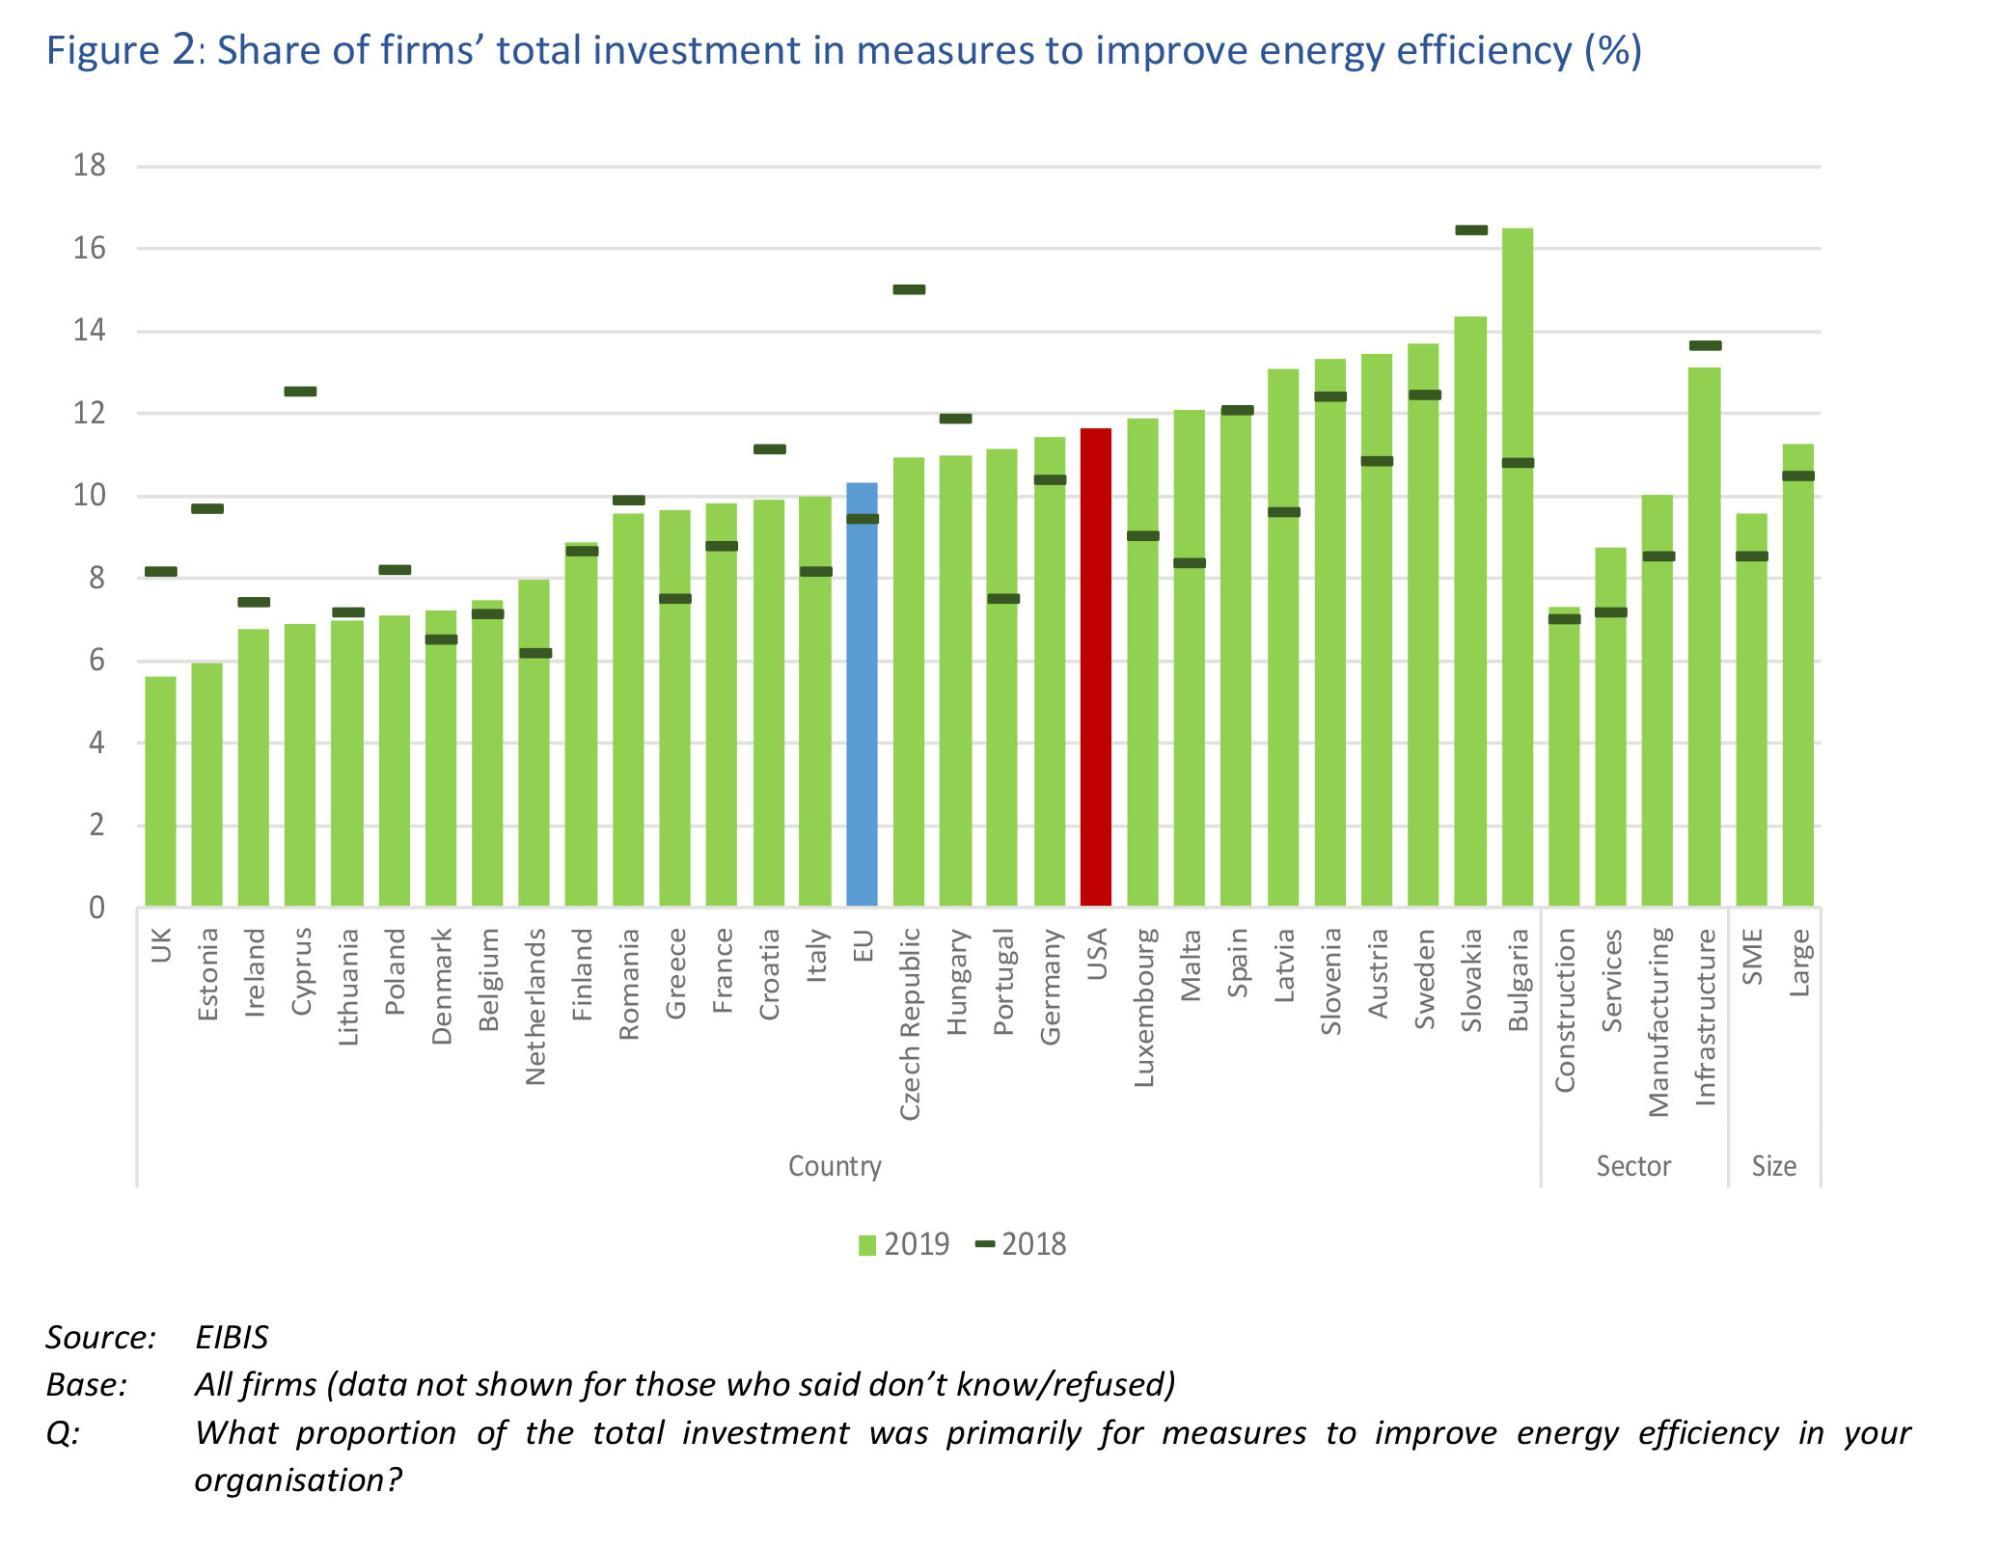 Share of firms’ total investment in measures to improve energy efficiency (%)